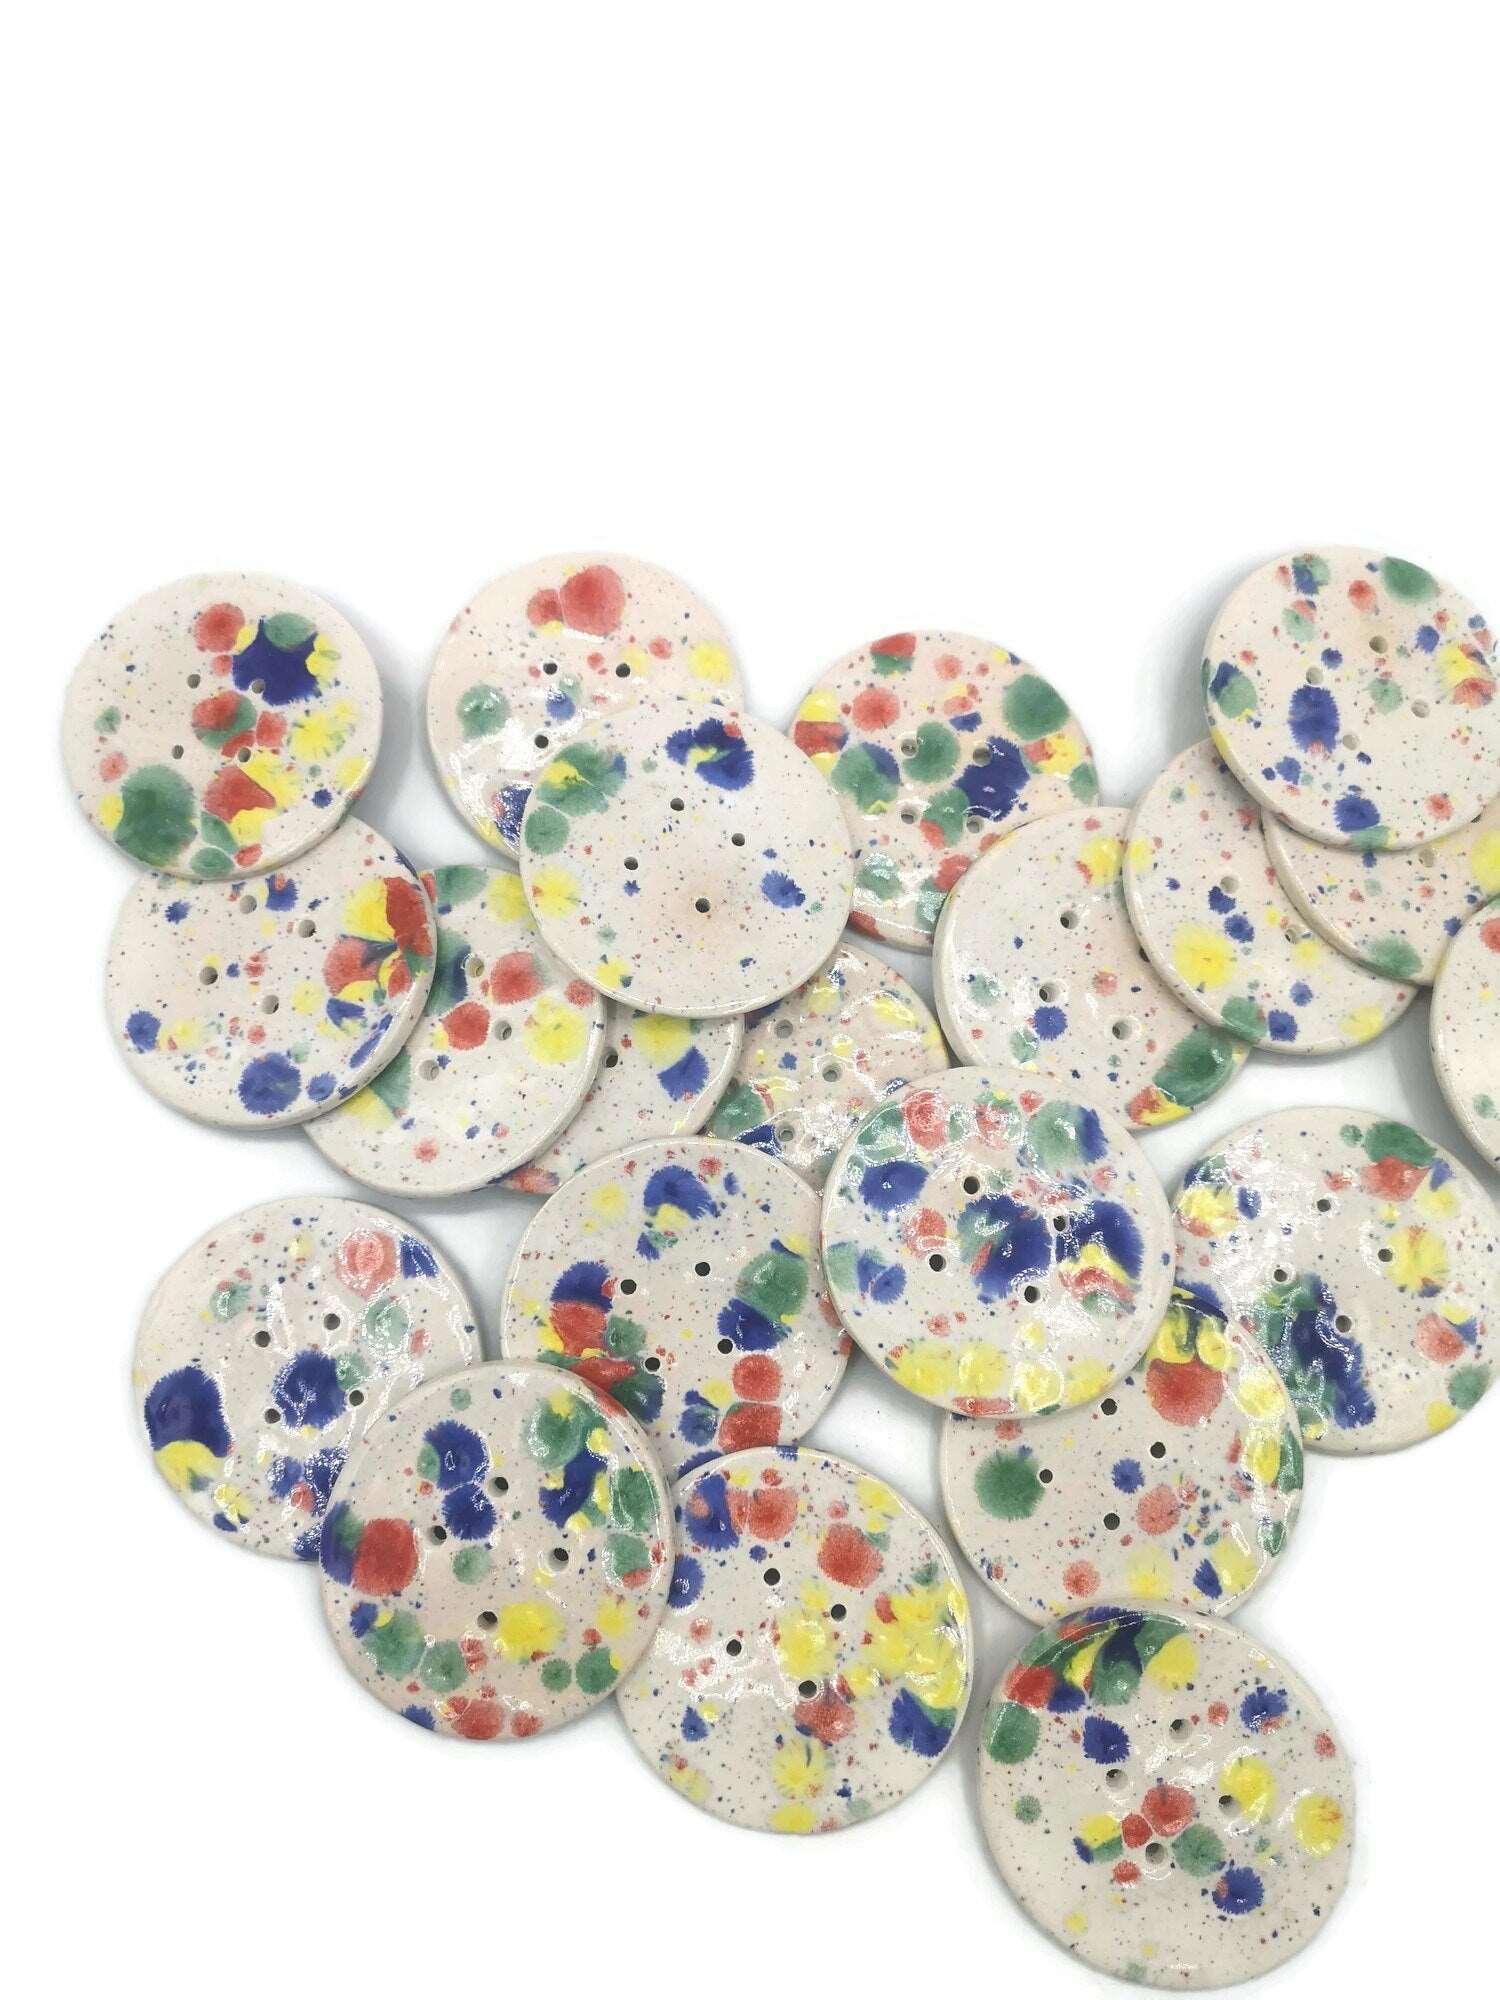 1Pc 65mm Colorful Giant Sewing Buttons, Jumbo Confetti Decorative Novelty Extra Large Buttons for Crafts, Handmade Ceramic Coat Button